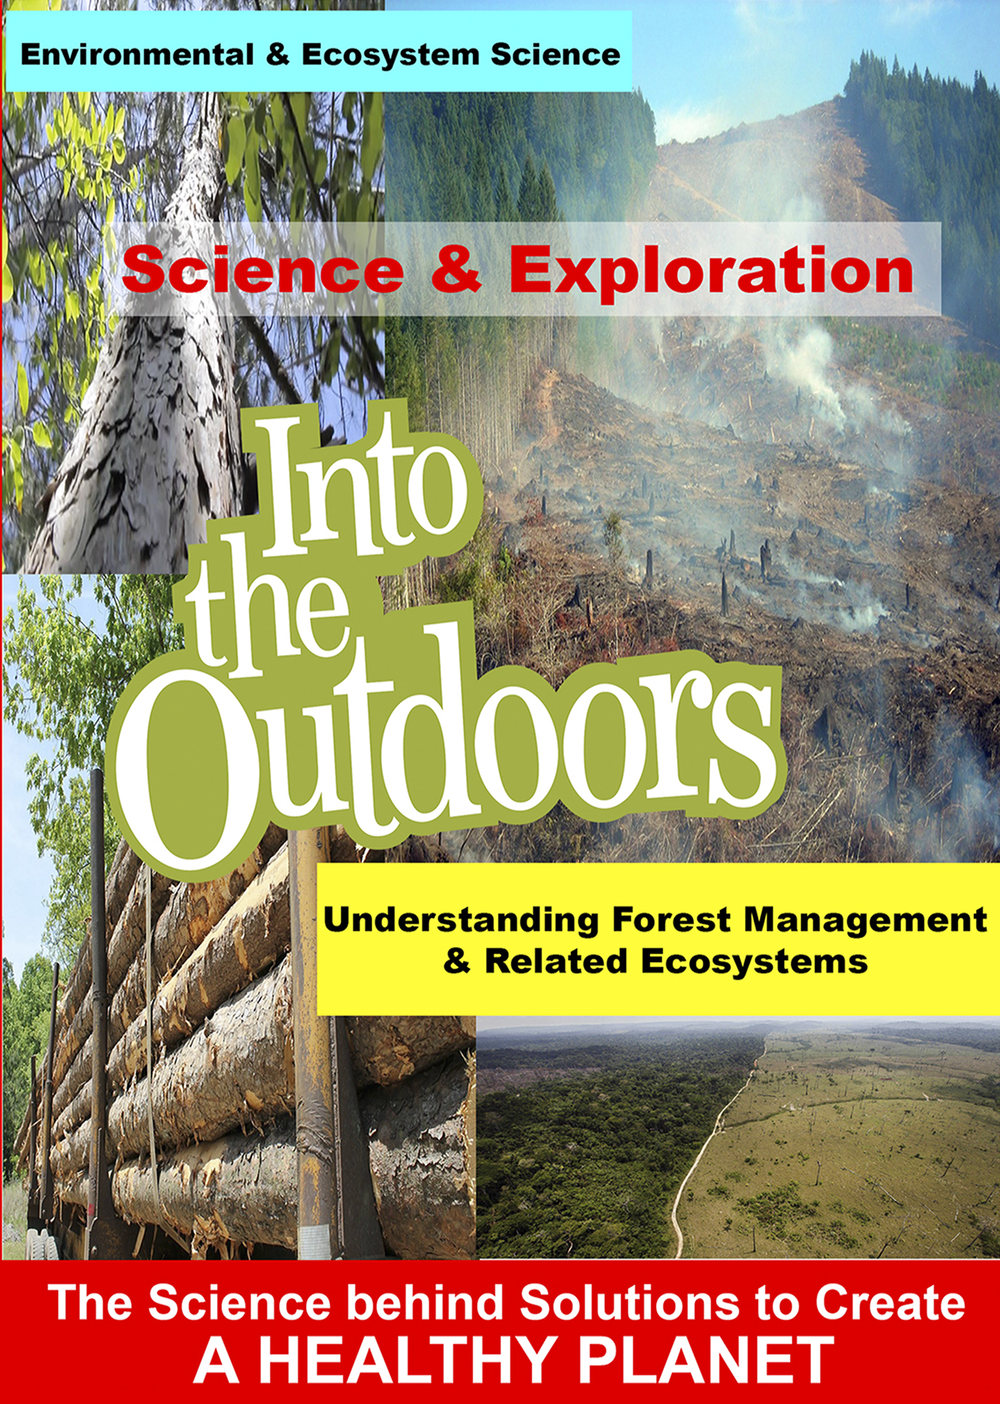 K4990 - Understanding Forest Management & Related Ecosystems